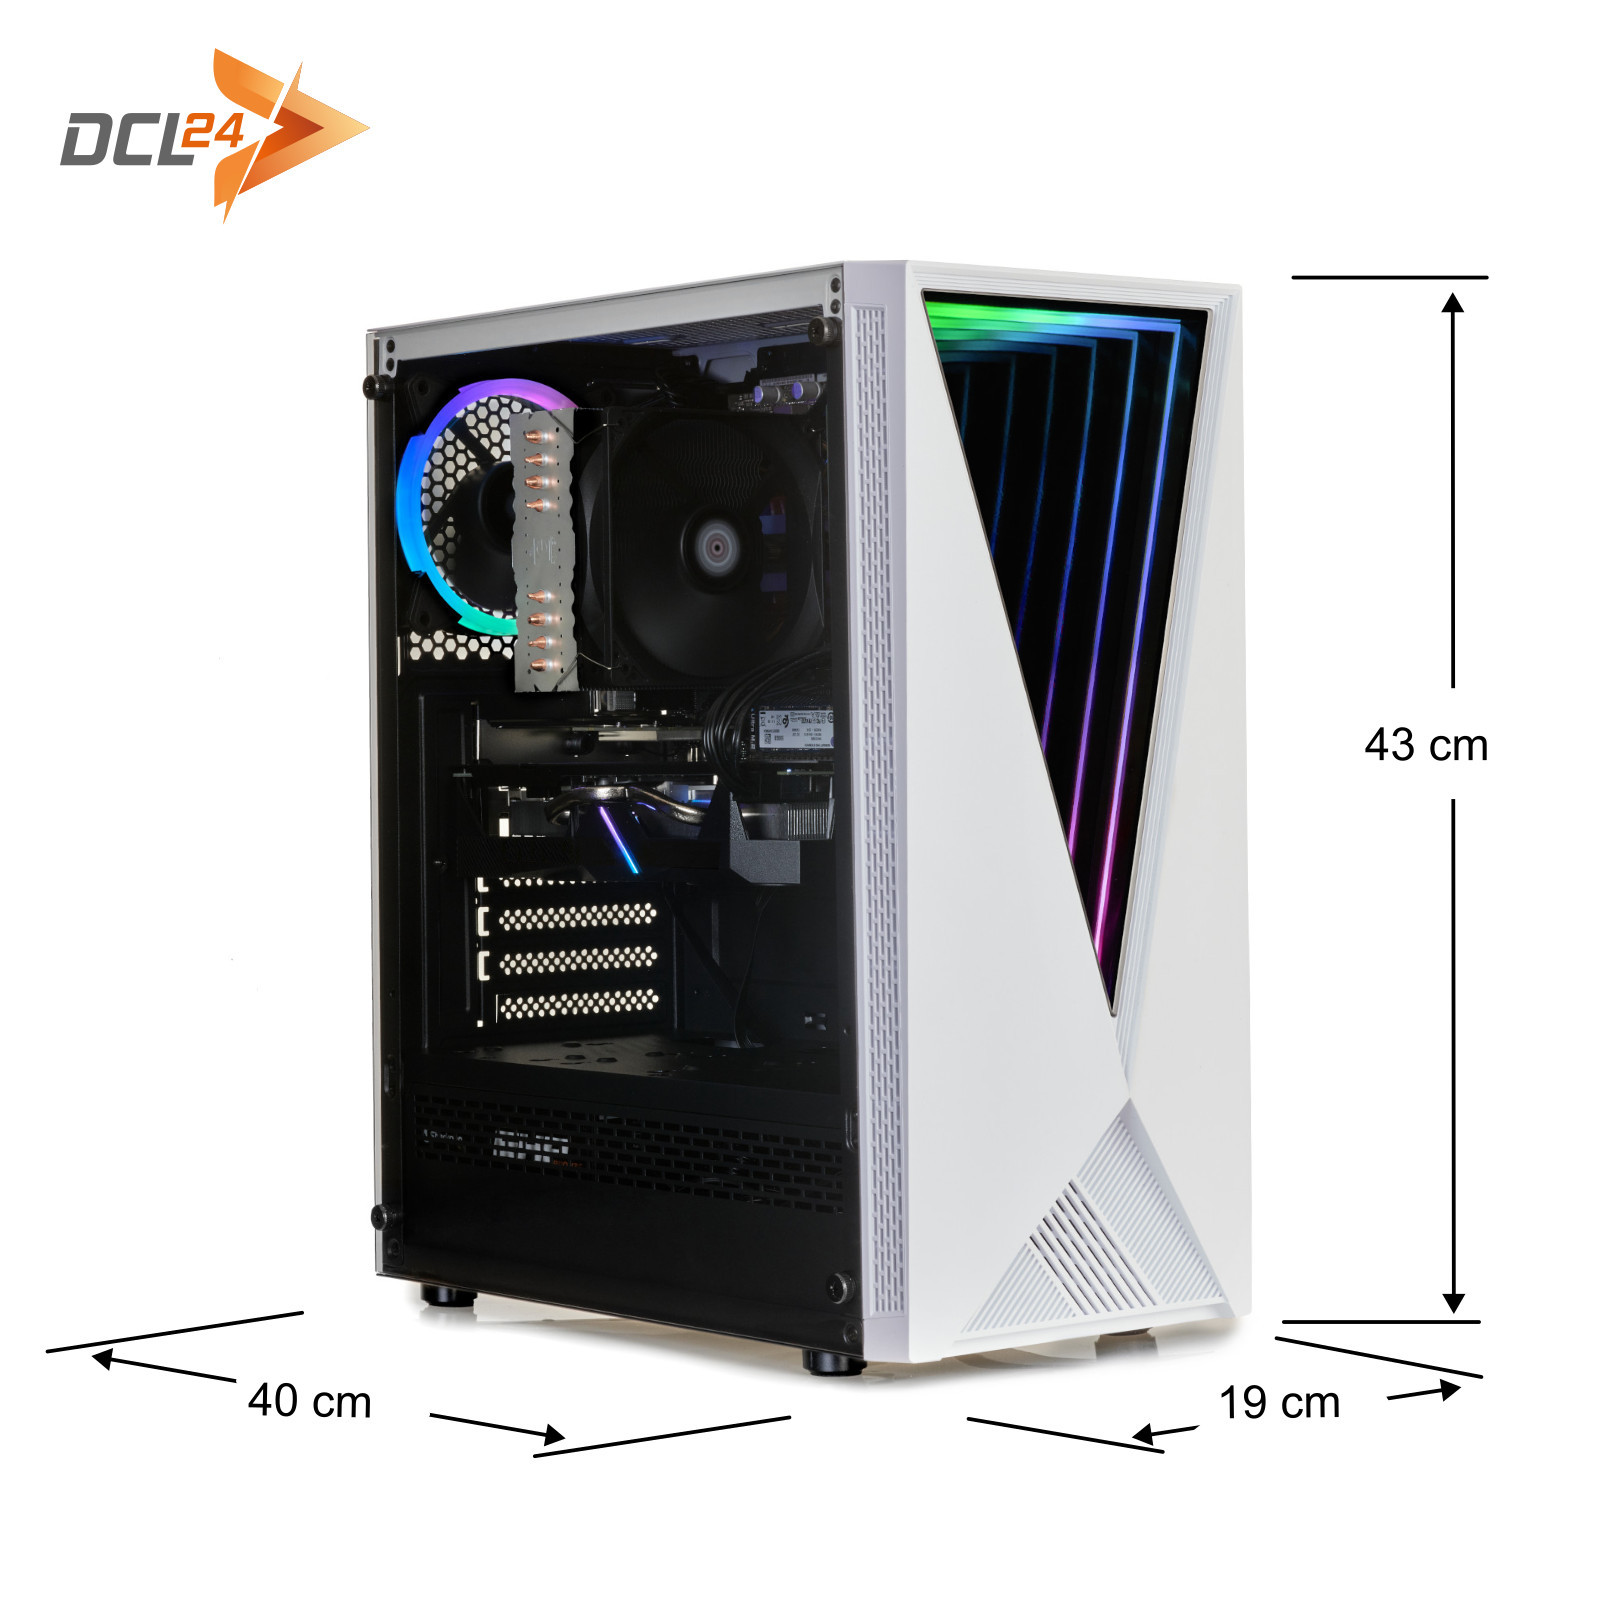 PC, SSD RAM, GB Gaming DCL24 GB 16 1000 Void,